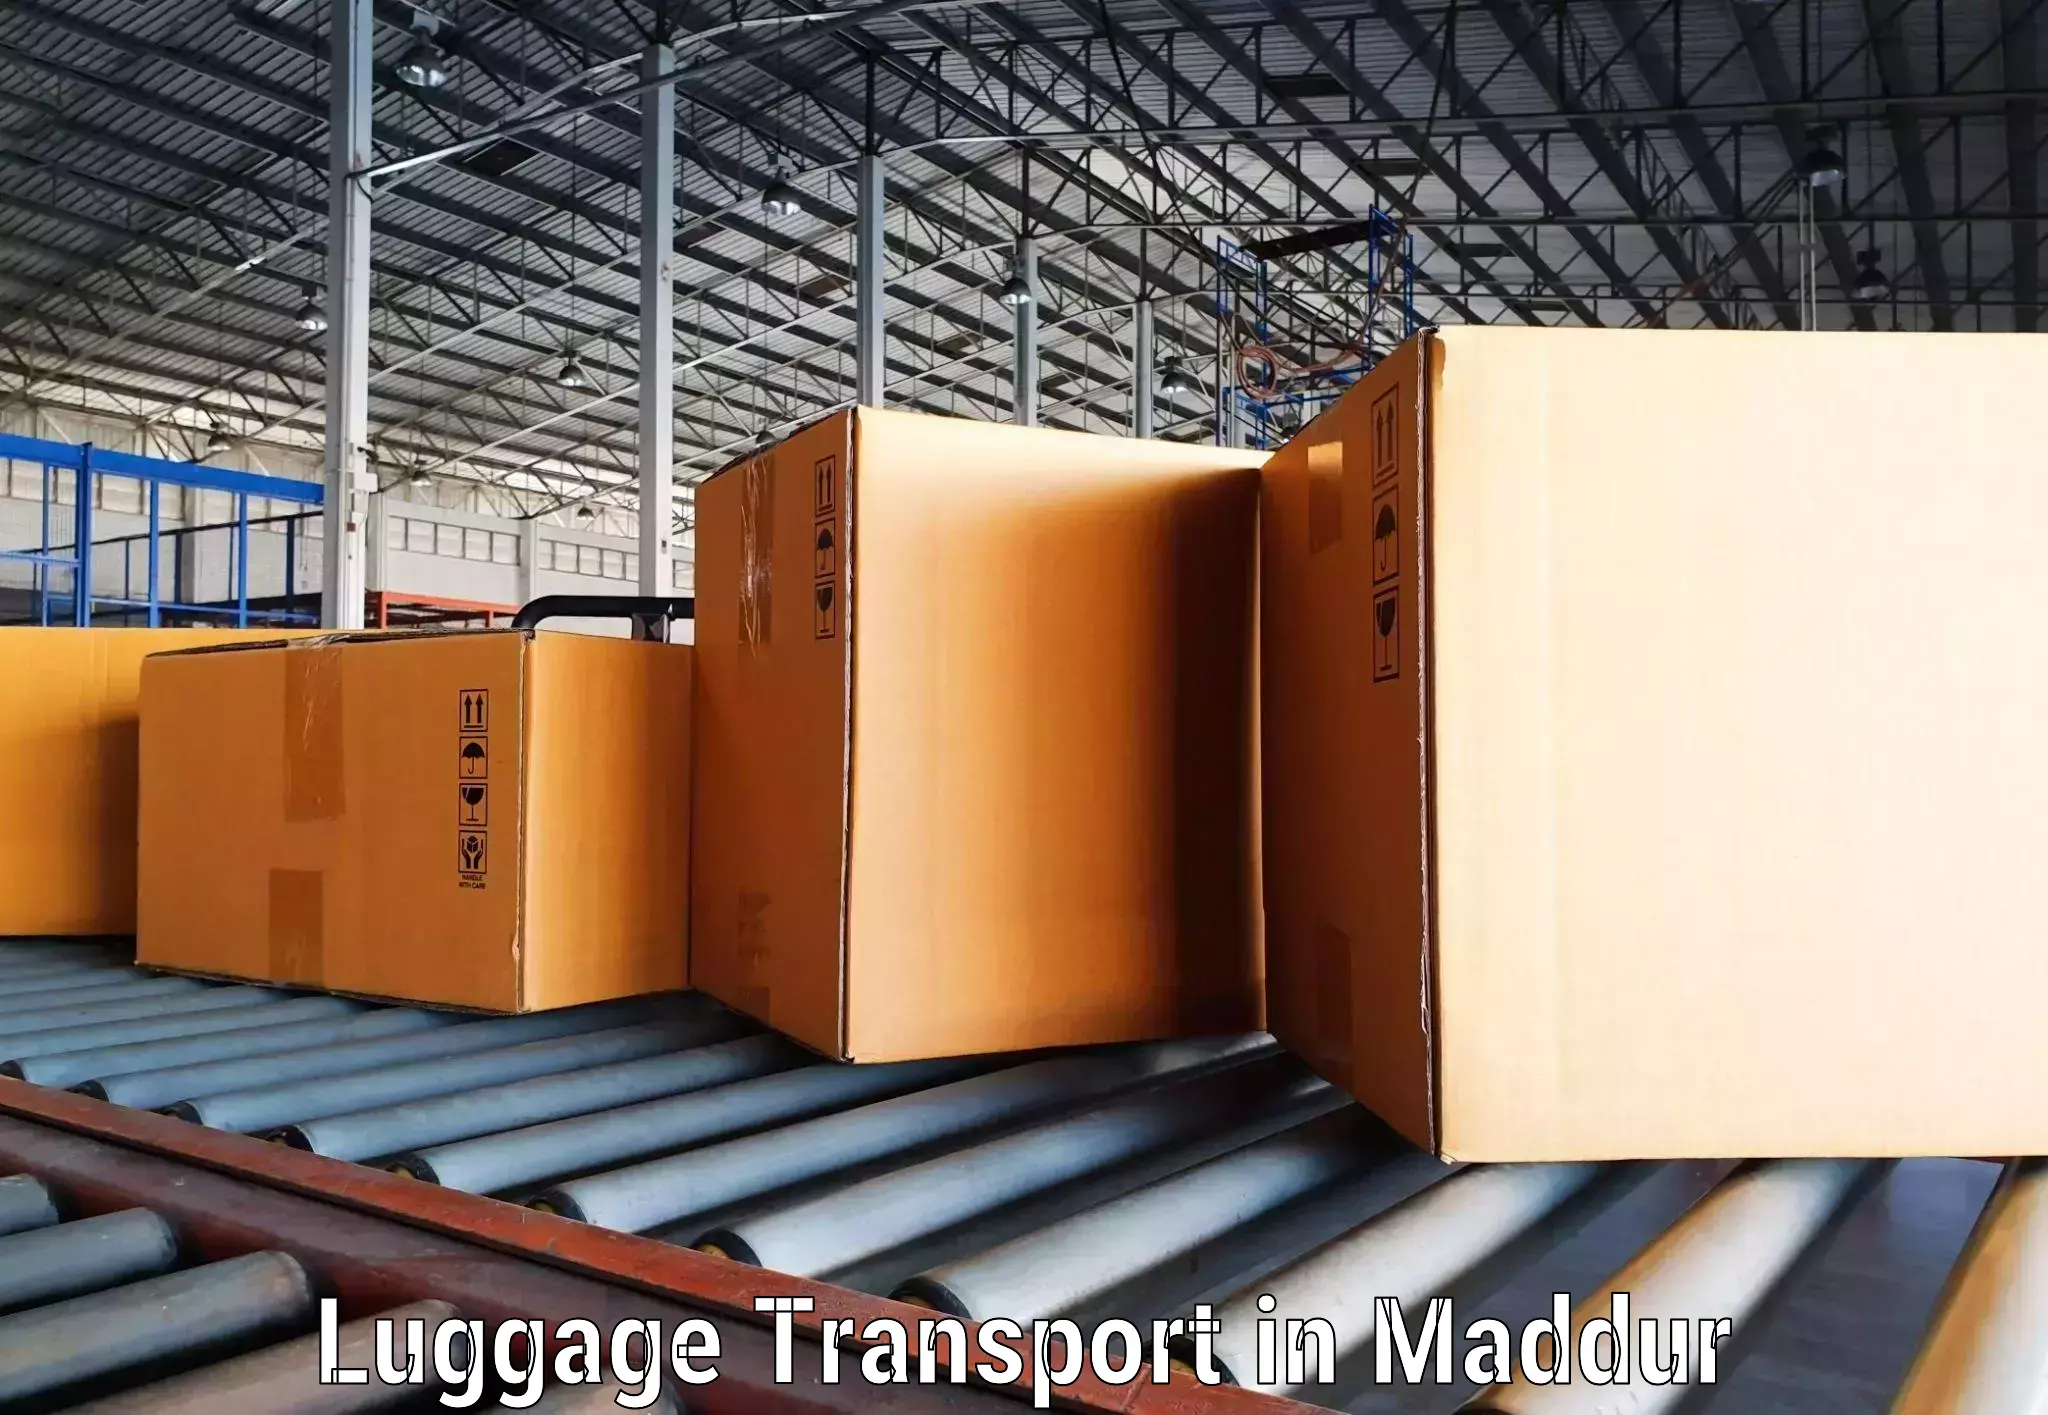 Luggage delivery optimization in Maddur